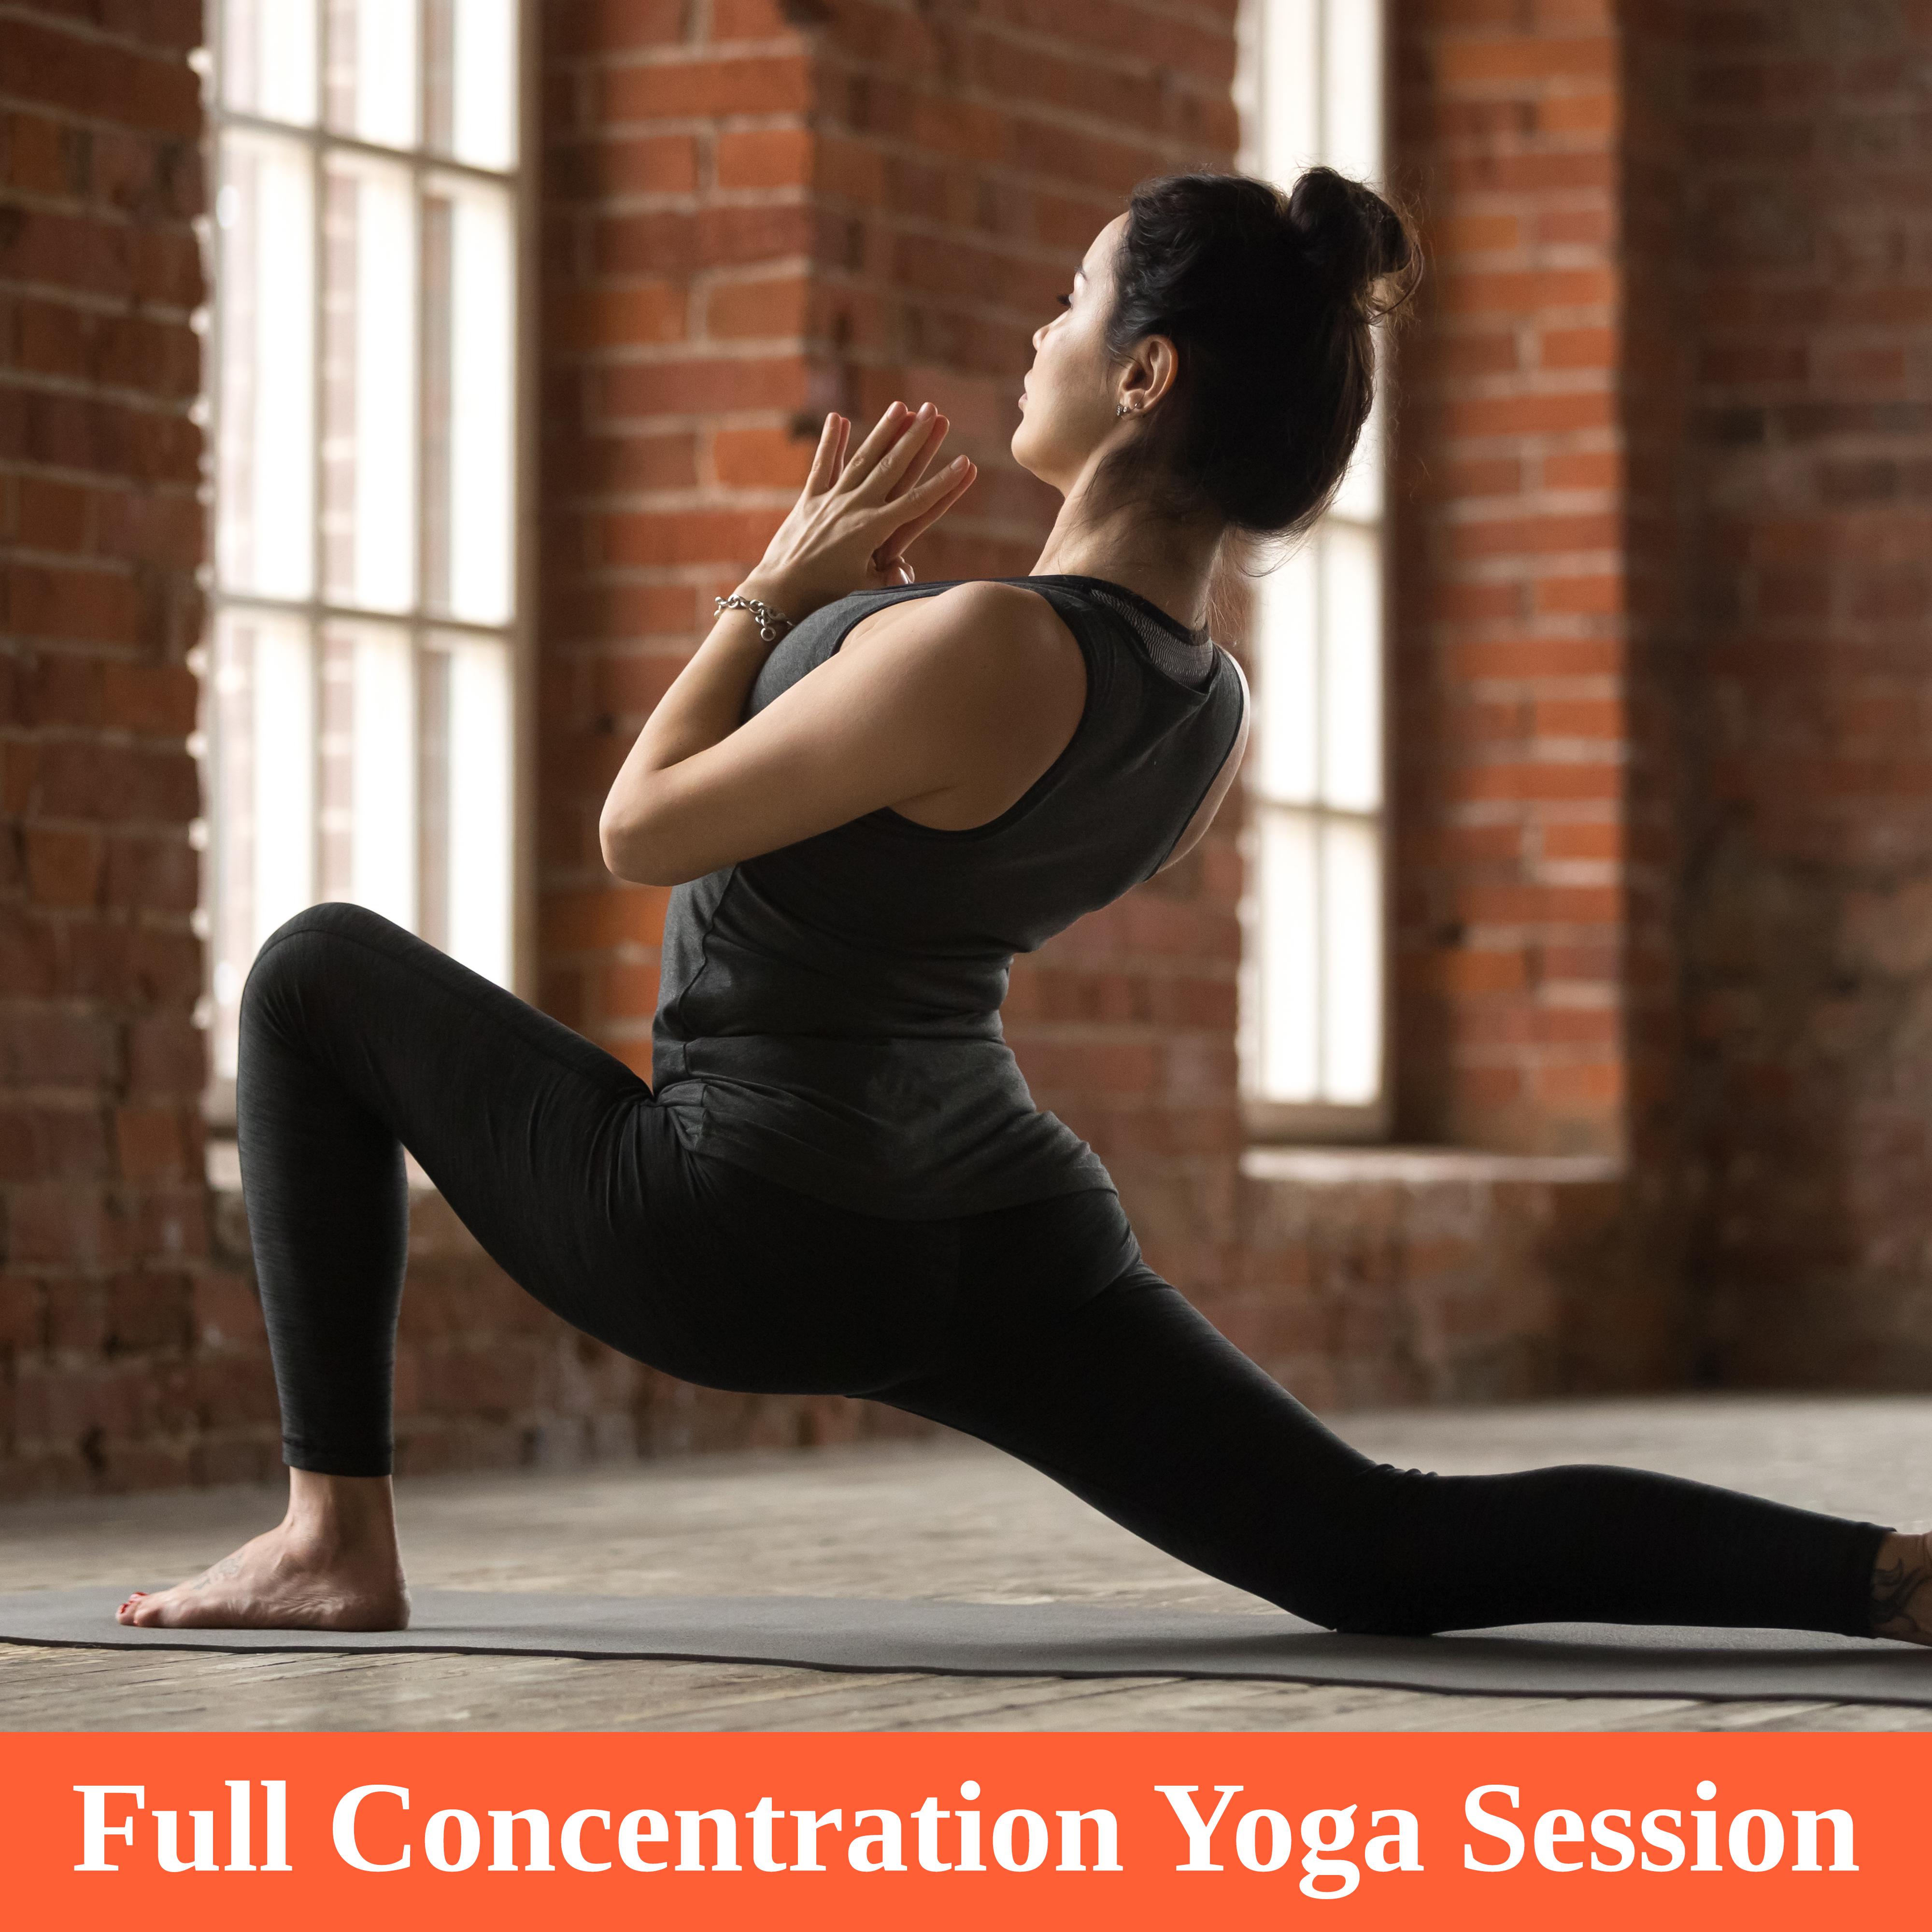 Full Concentration Yoga Session  Meditation  Relaxation 15 New Age Tracks for Yoga Connectrion Between Body  Soul